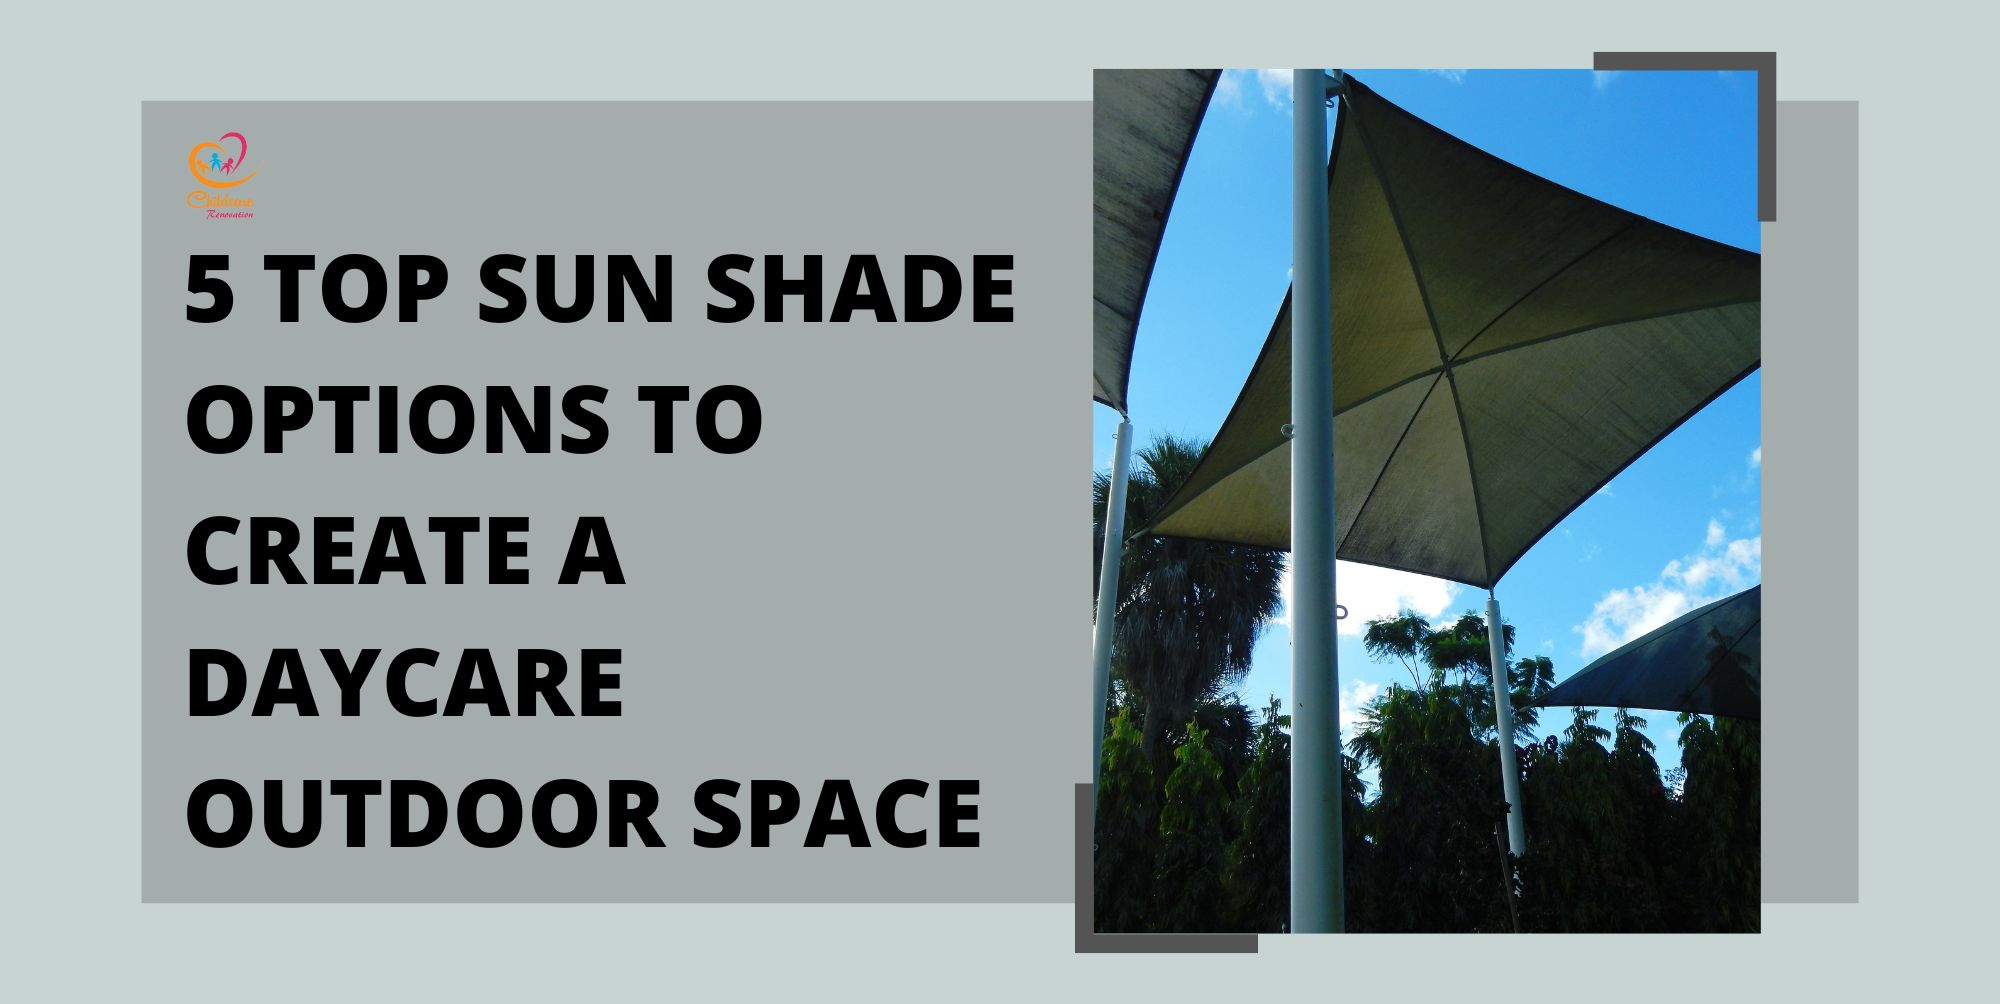 5 Top Sun Shade Options To Create A Daycare Outdoor Space